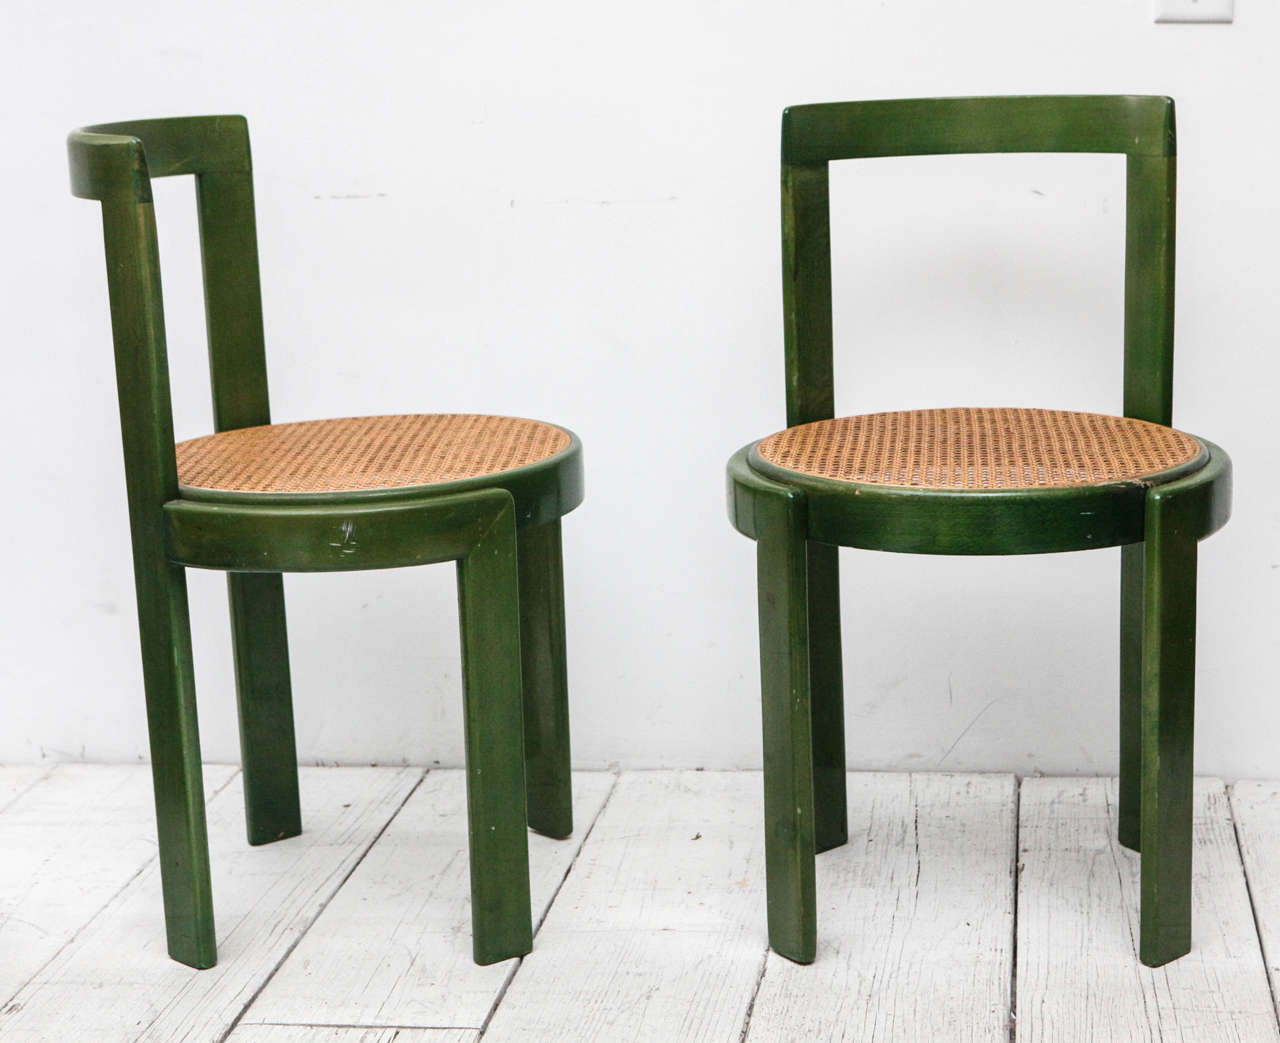 Four beautiful grass-green washed dining chairs with newly restored cane seats.